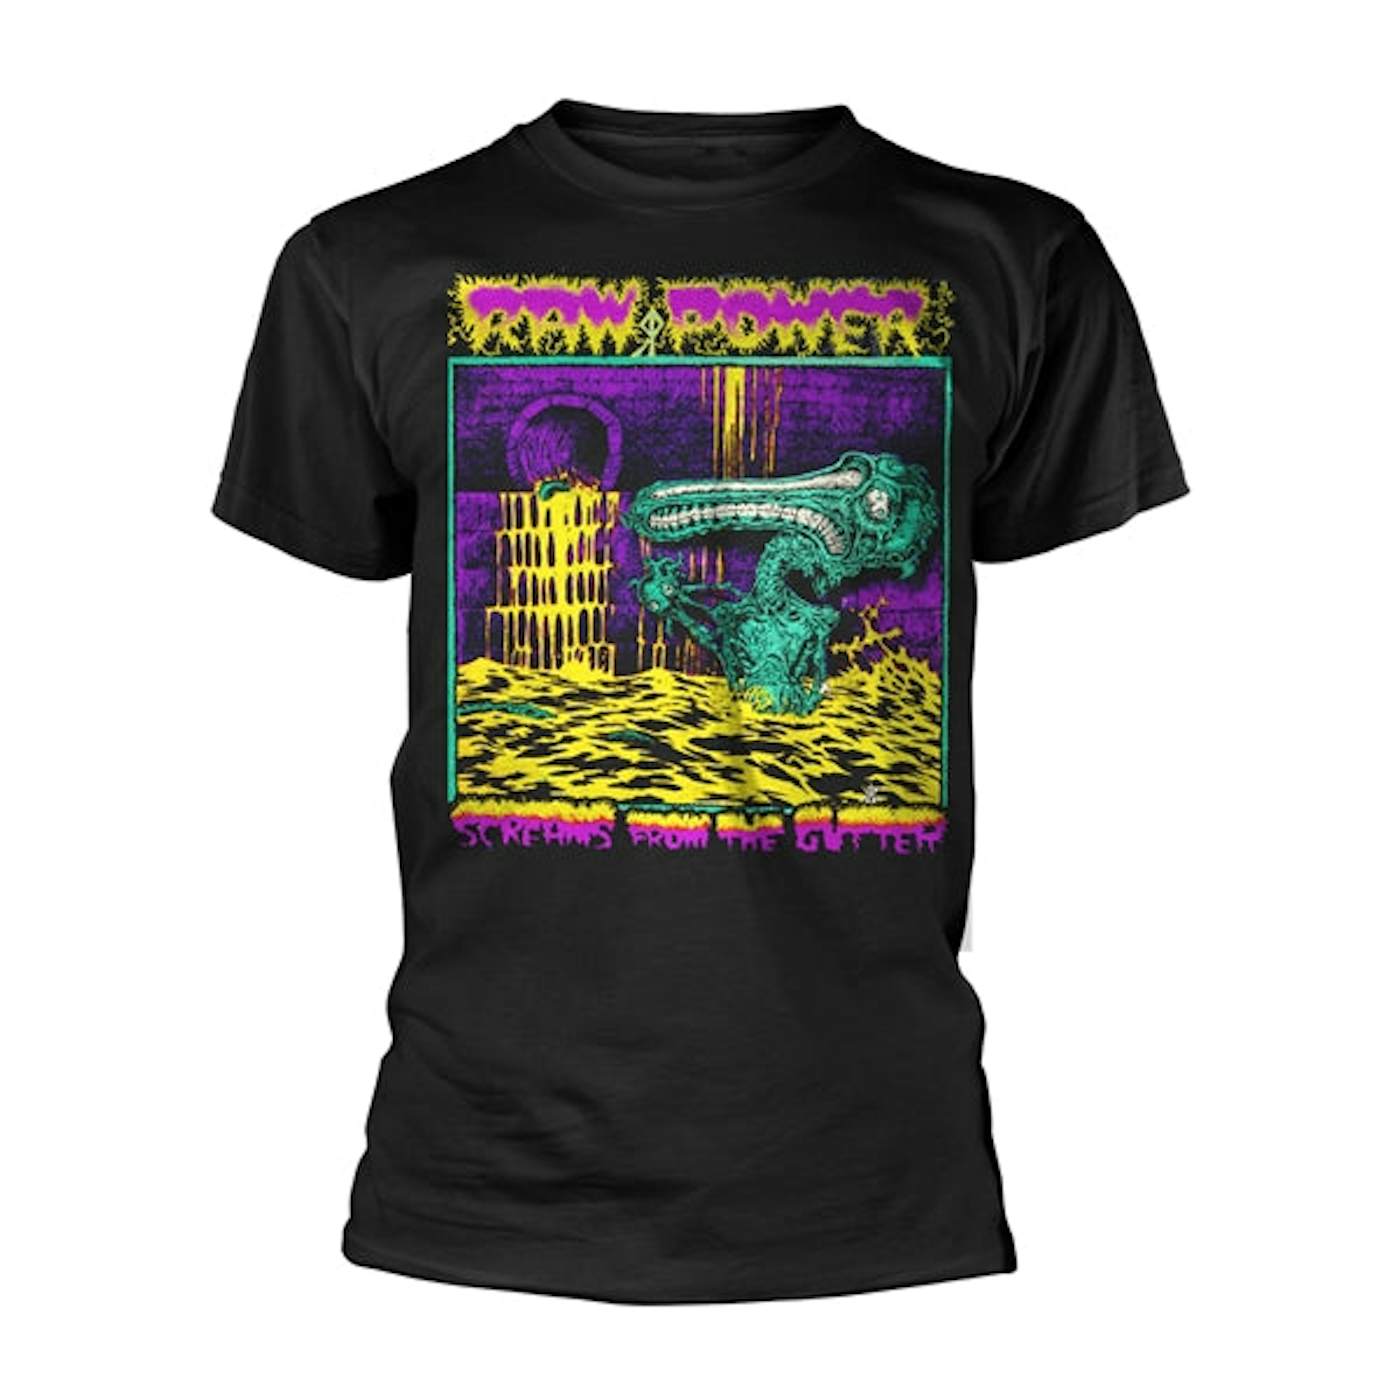 Raw Power T Shirt - Screams From The Gutter